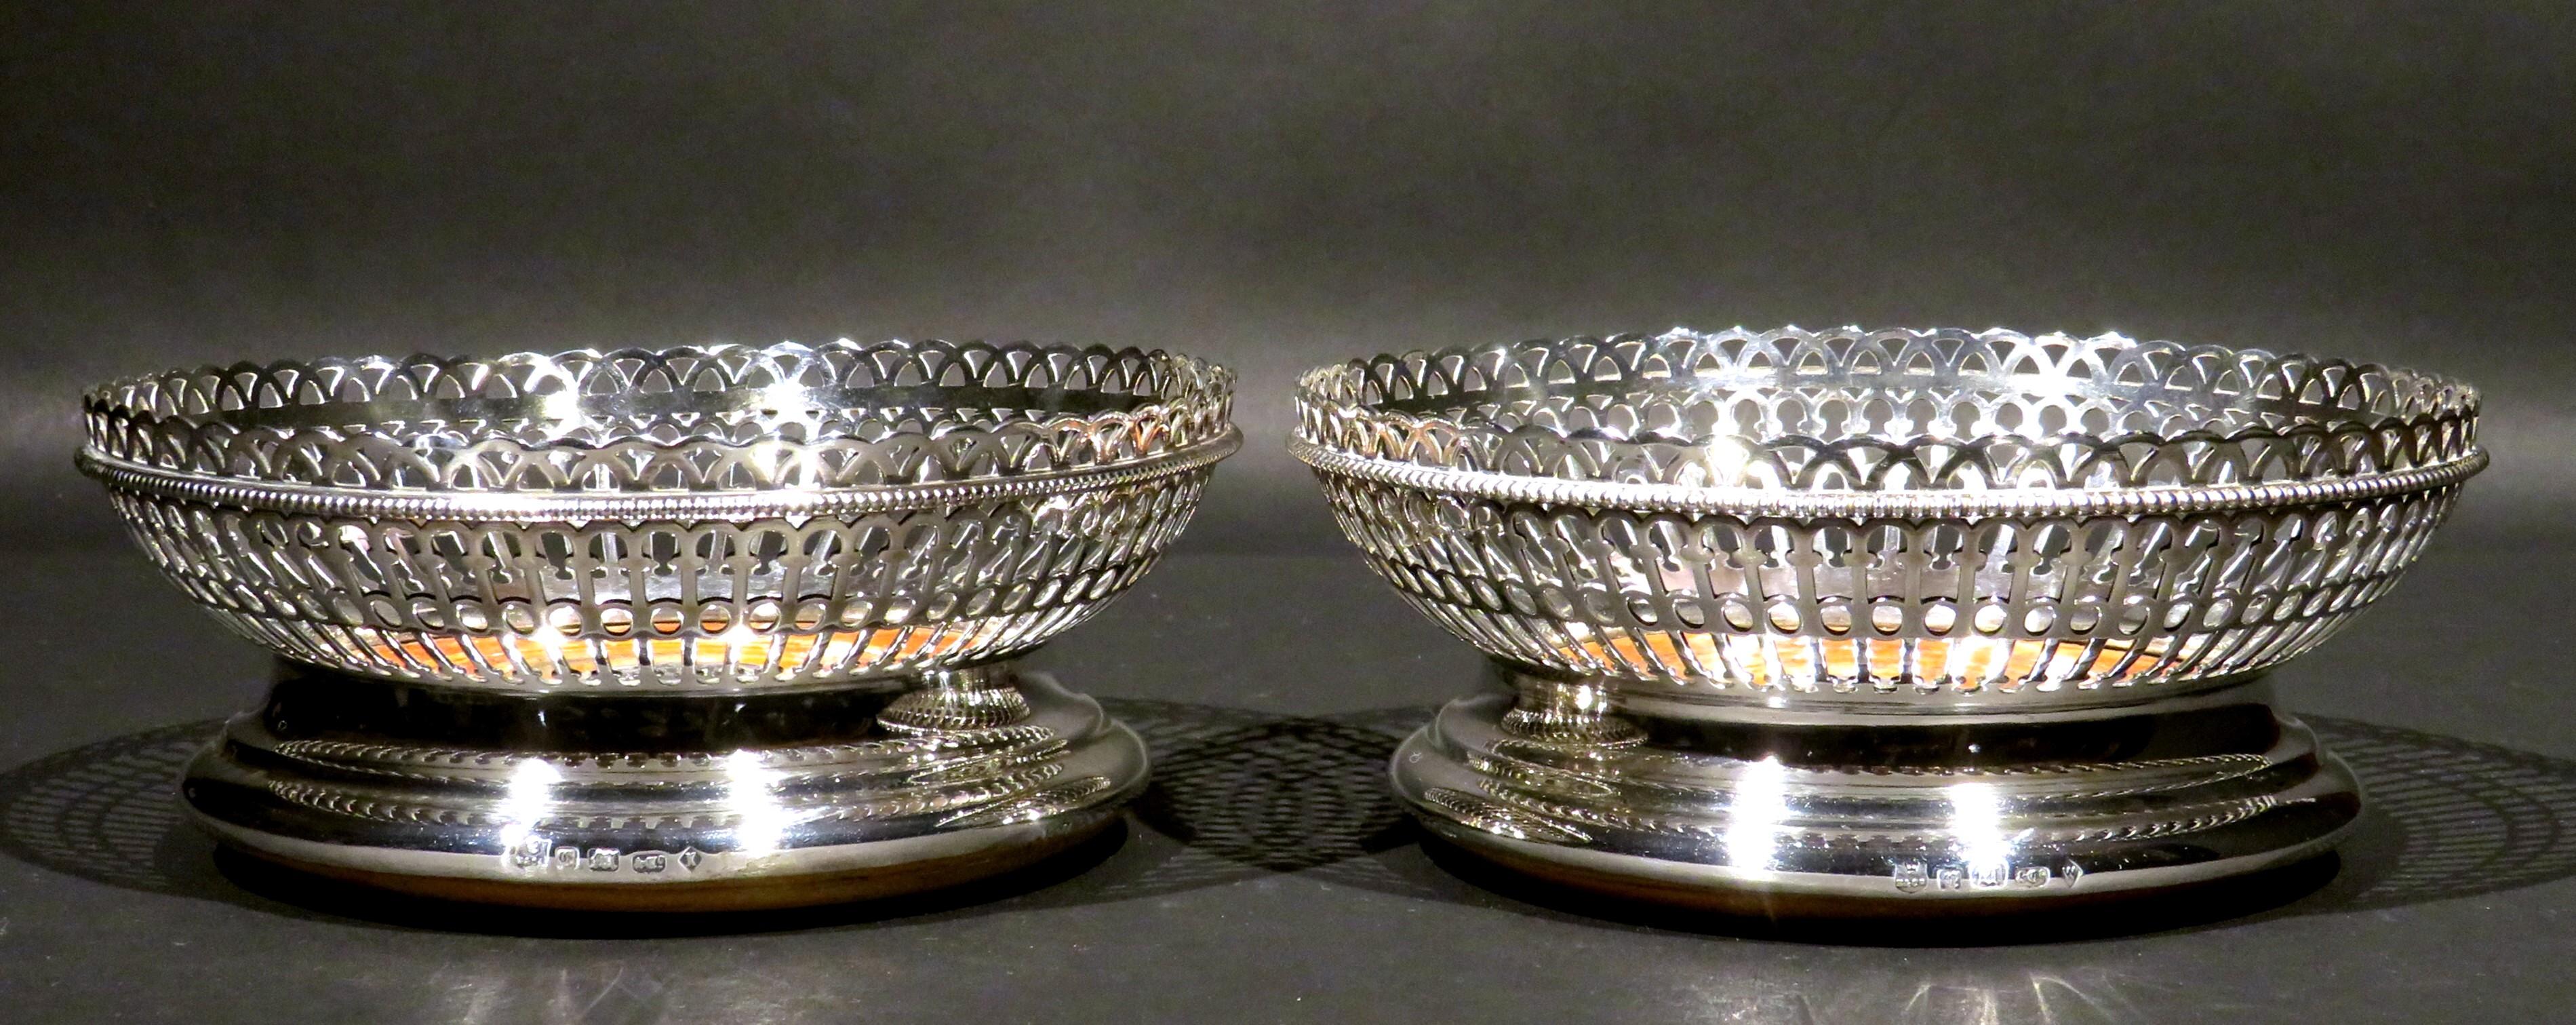 A very handsome pair of mid-19th century silver plated wine bottle coasters by Elkington & Company of London, showing swelled and pierced latticework bodies rising from turned satinwood bases centred by silver plated roundels engraved with stags